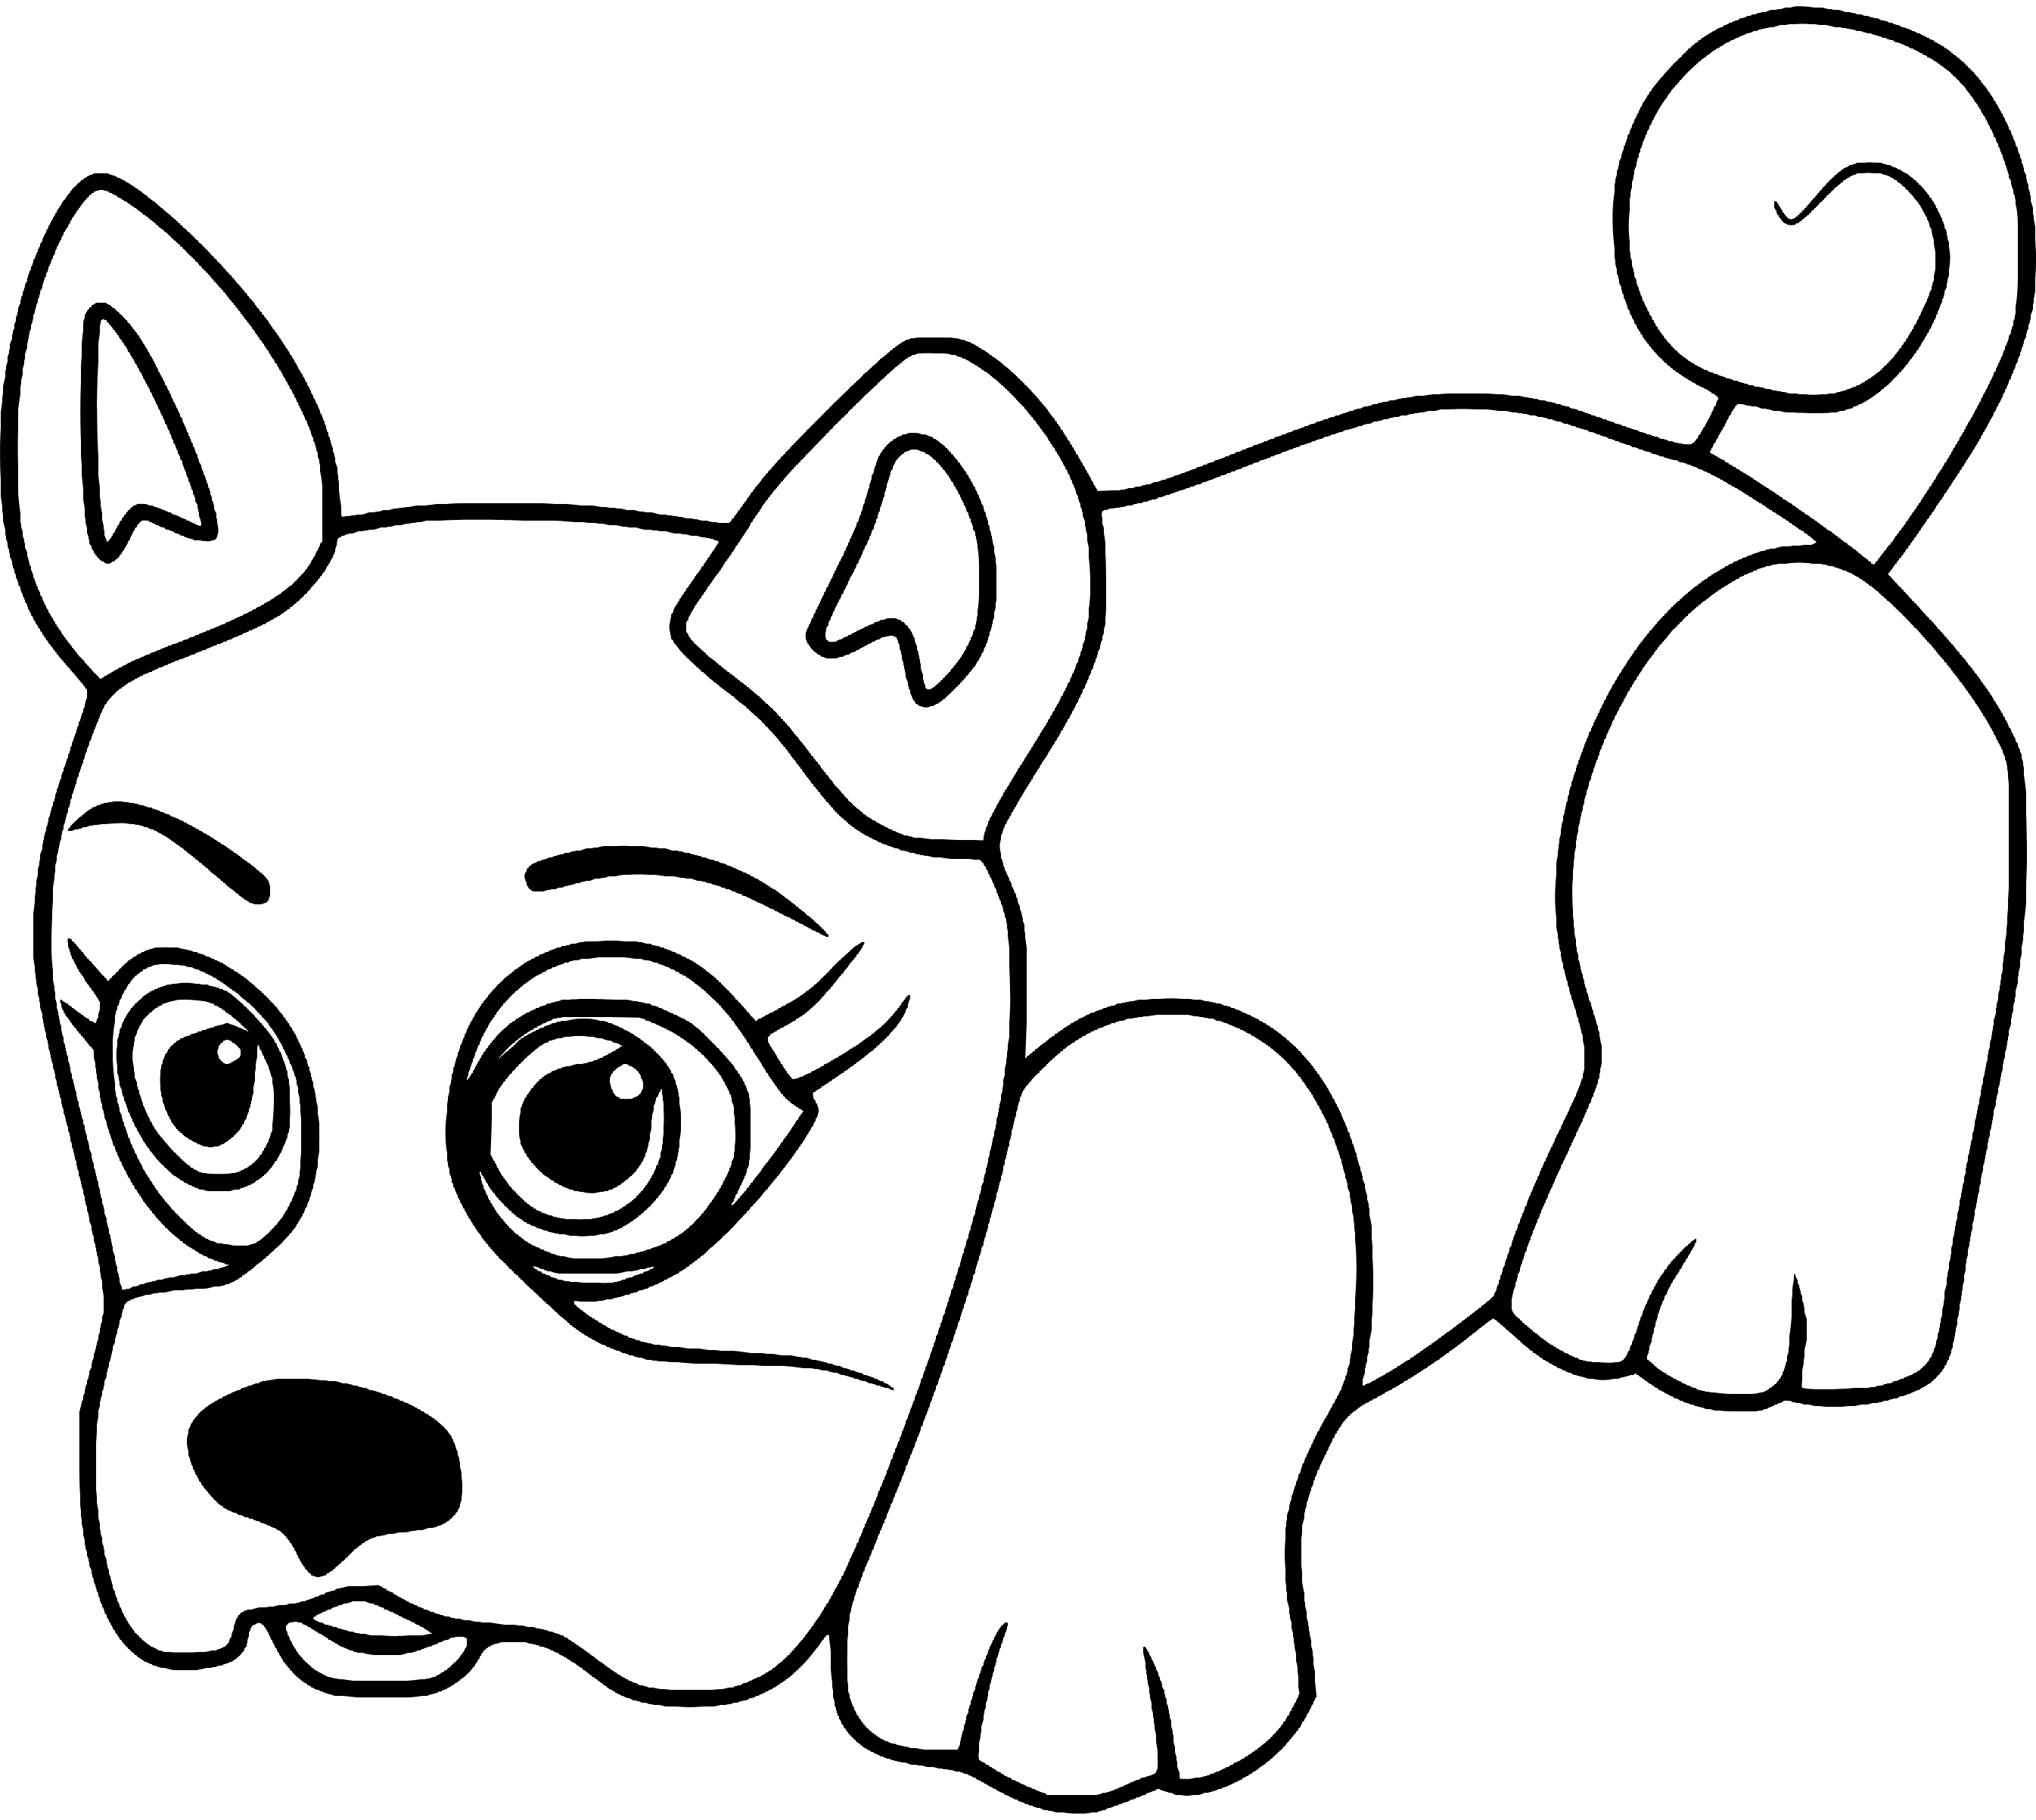 Printable Puppy sniffing Coloring Page for kids.